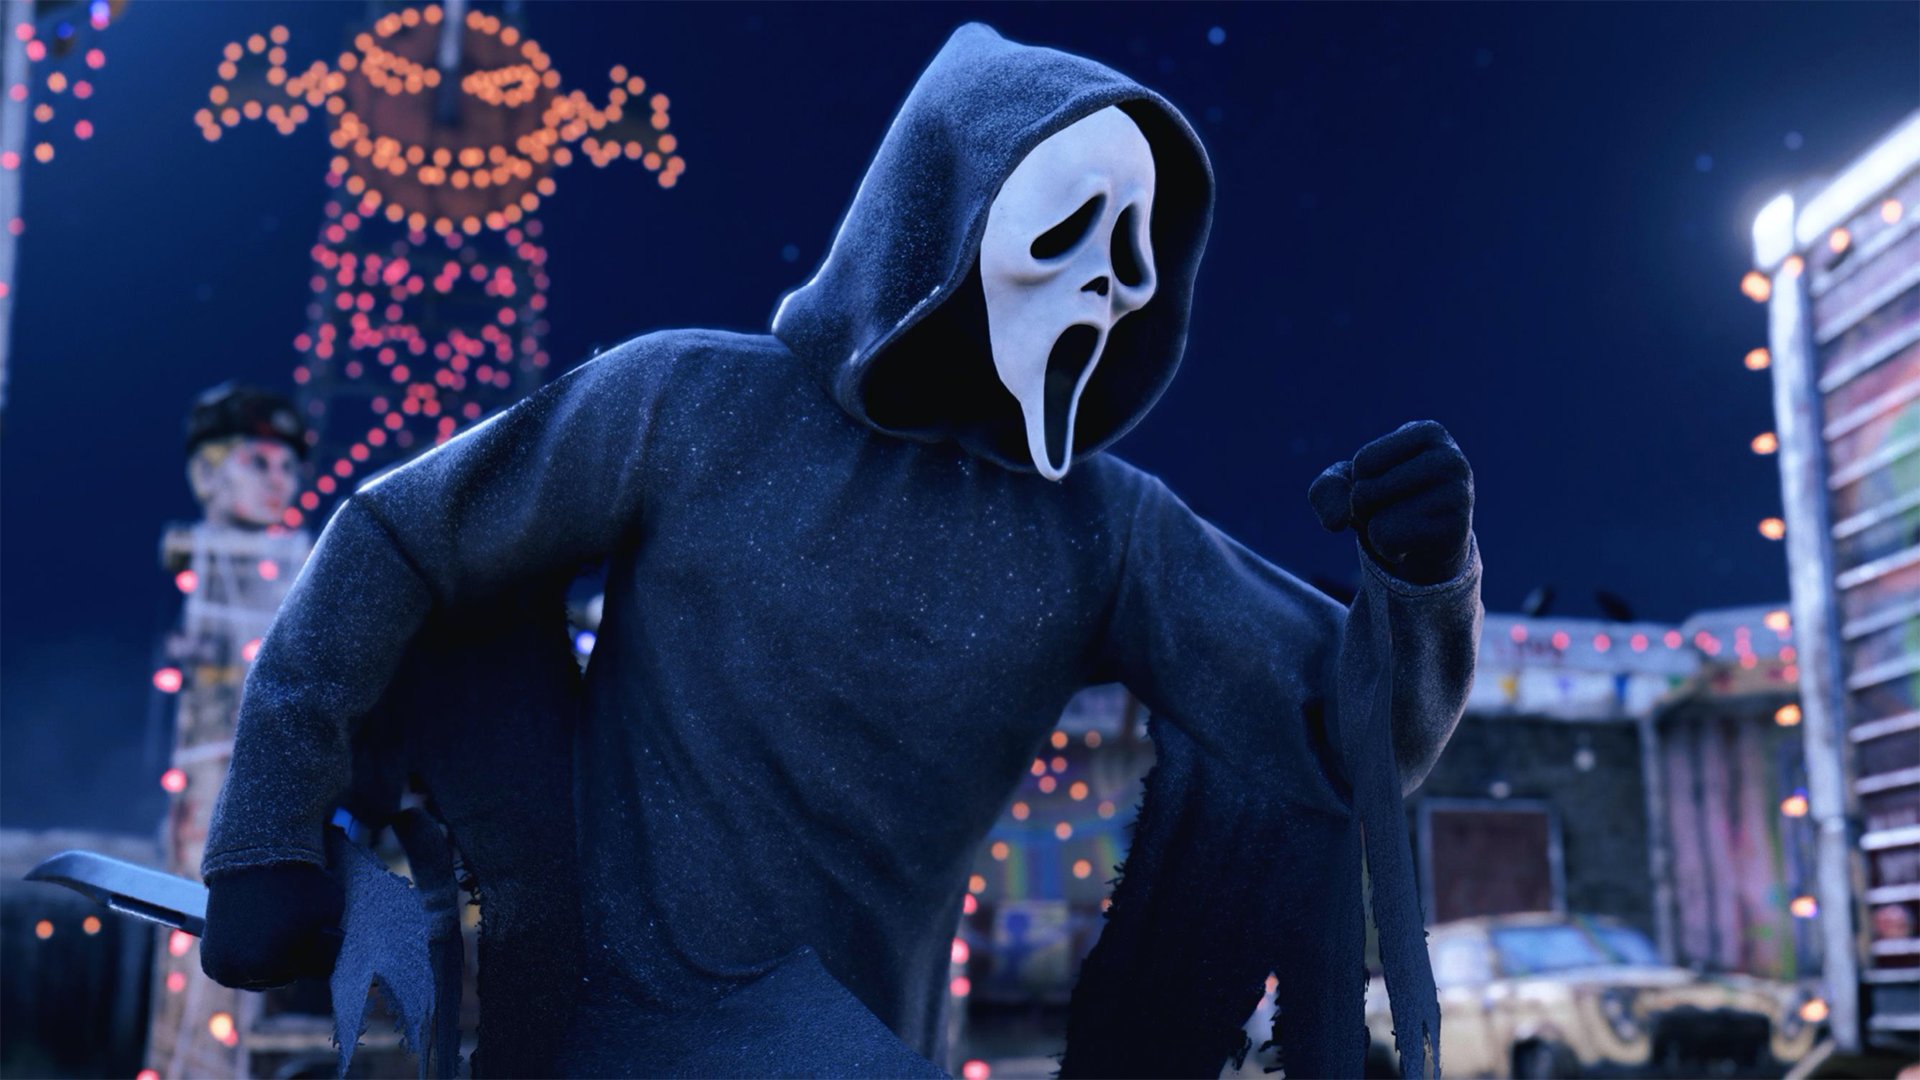 Find and eliminate all survivors in Scream Deathmatch